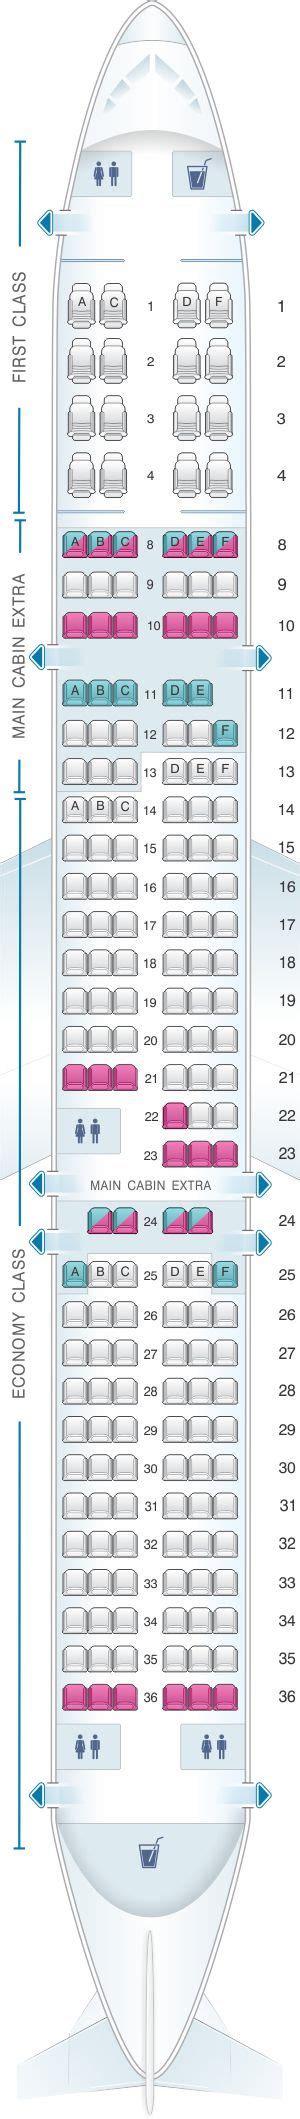 Seat Map American Airlines Airbus A321 181pax Airline Seats Vietnam